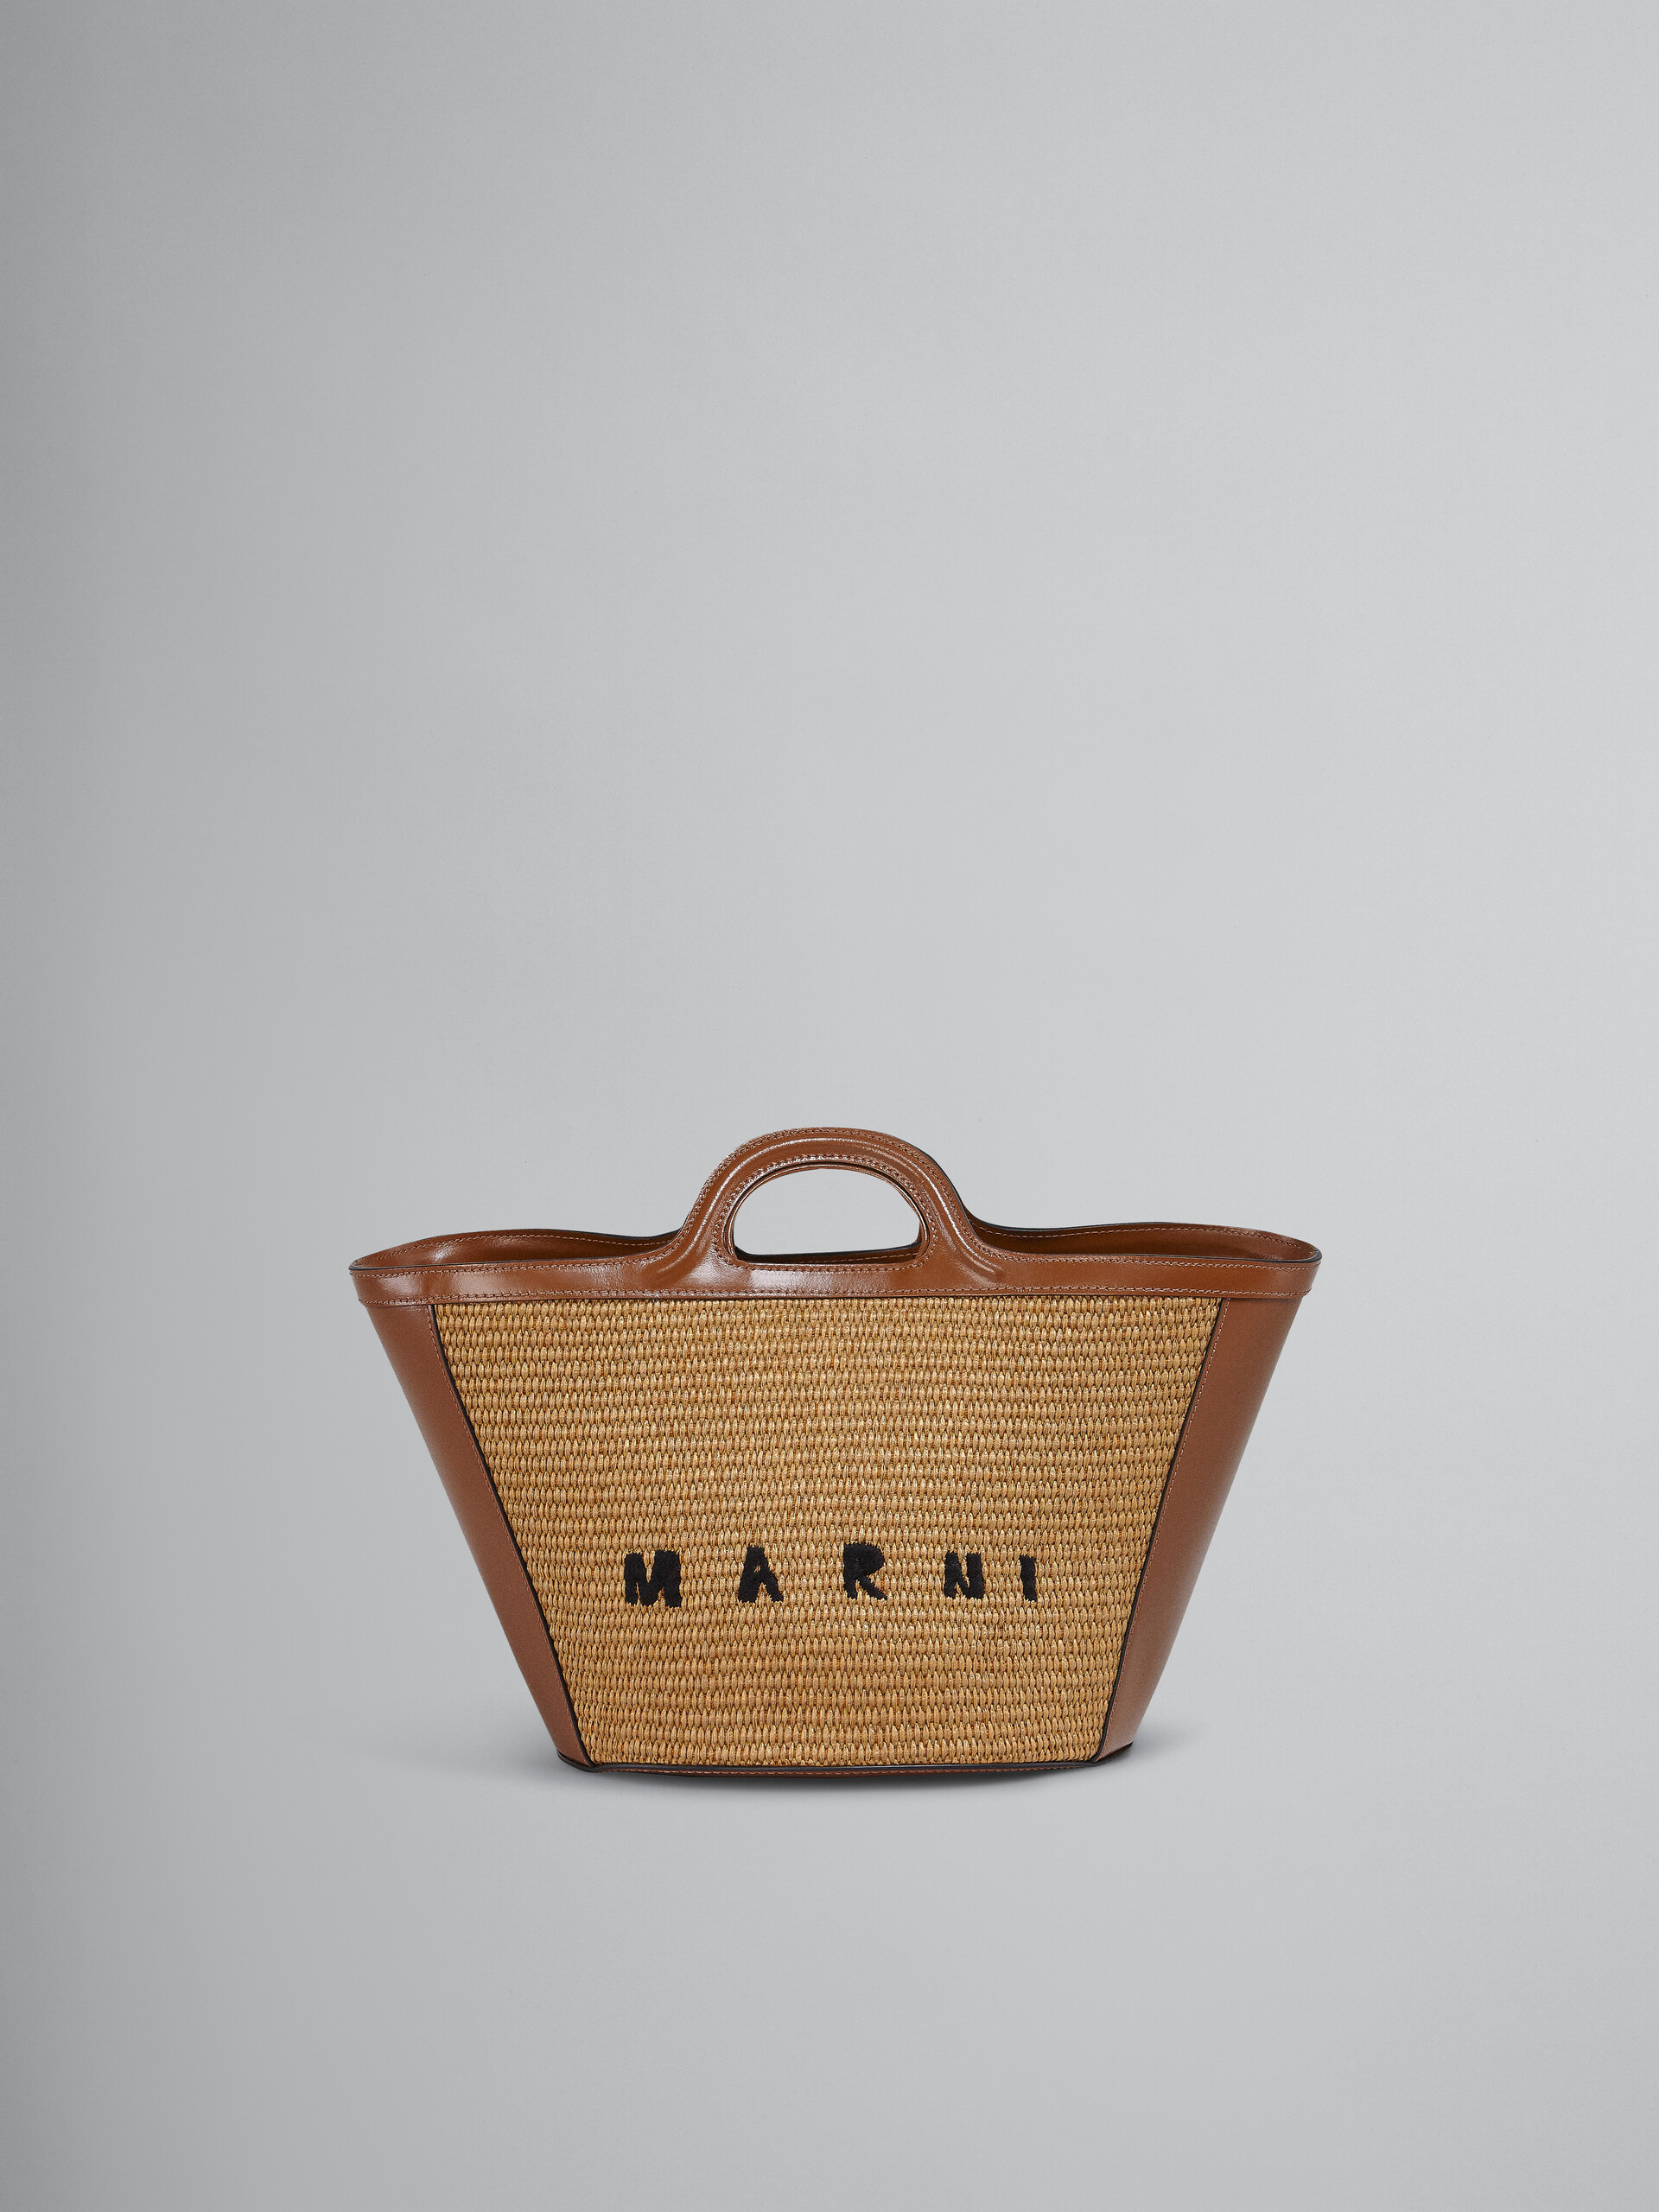 ding Vernederen schaak Tropicalia Small Bag in brown leather and raffia | Marni